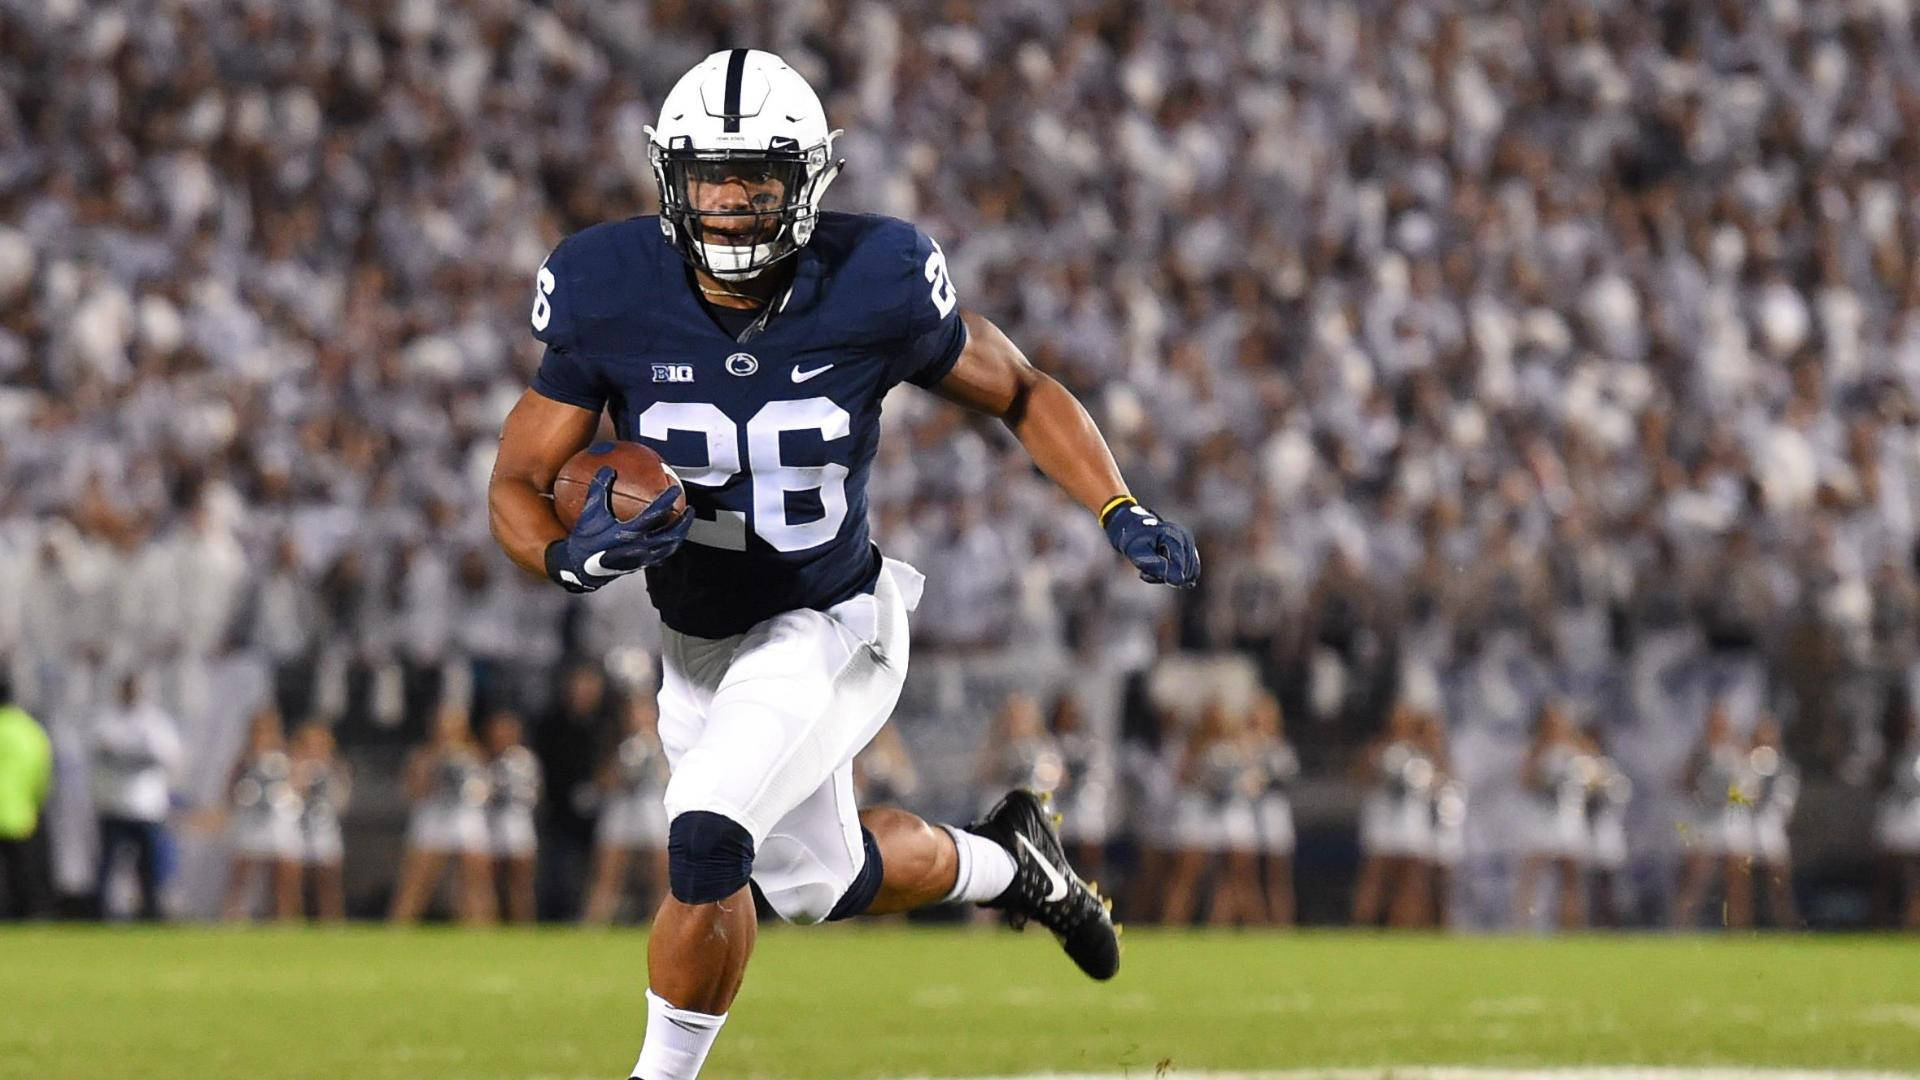 Penn State Football Player Running With The Ball Wallpaper